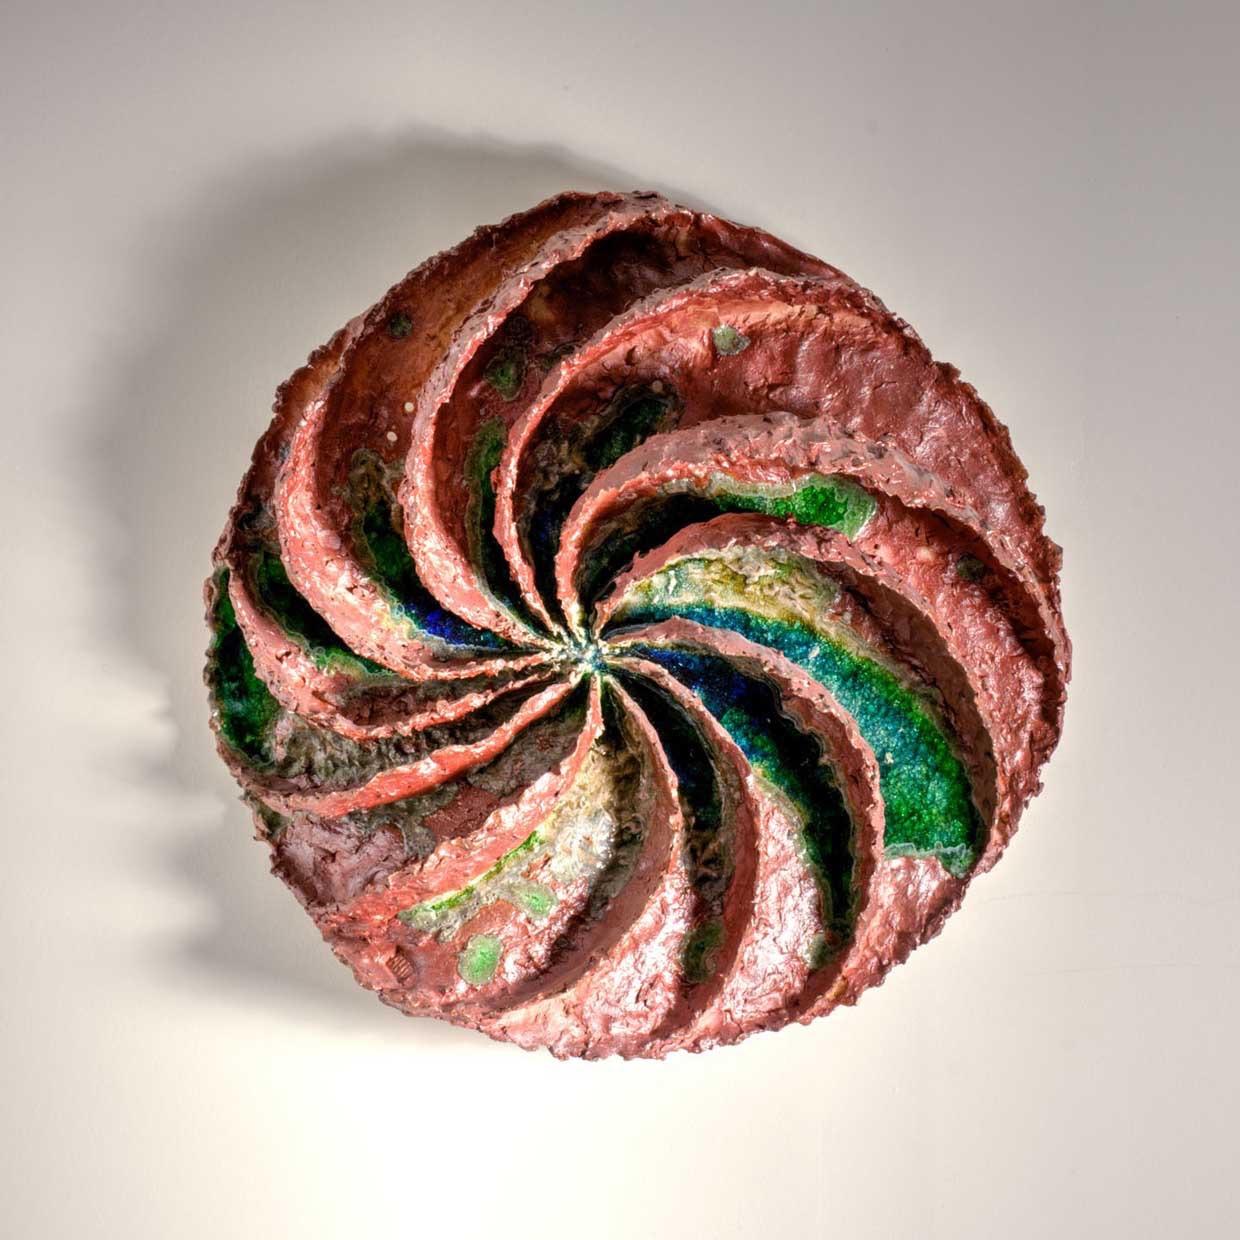 "Turbulence", textured ceramic in pinks and greens, embodies essential clay - Sculpture by Allan Drossman